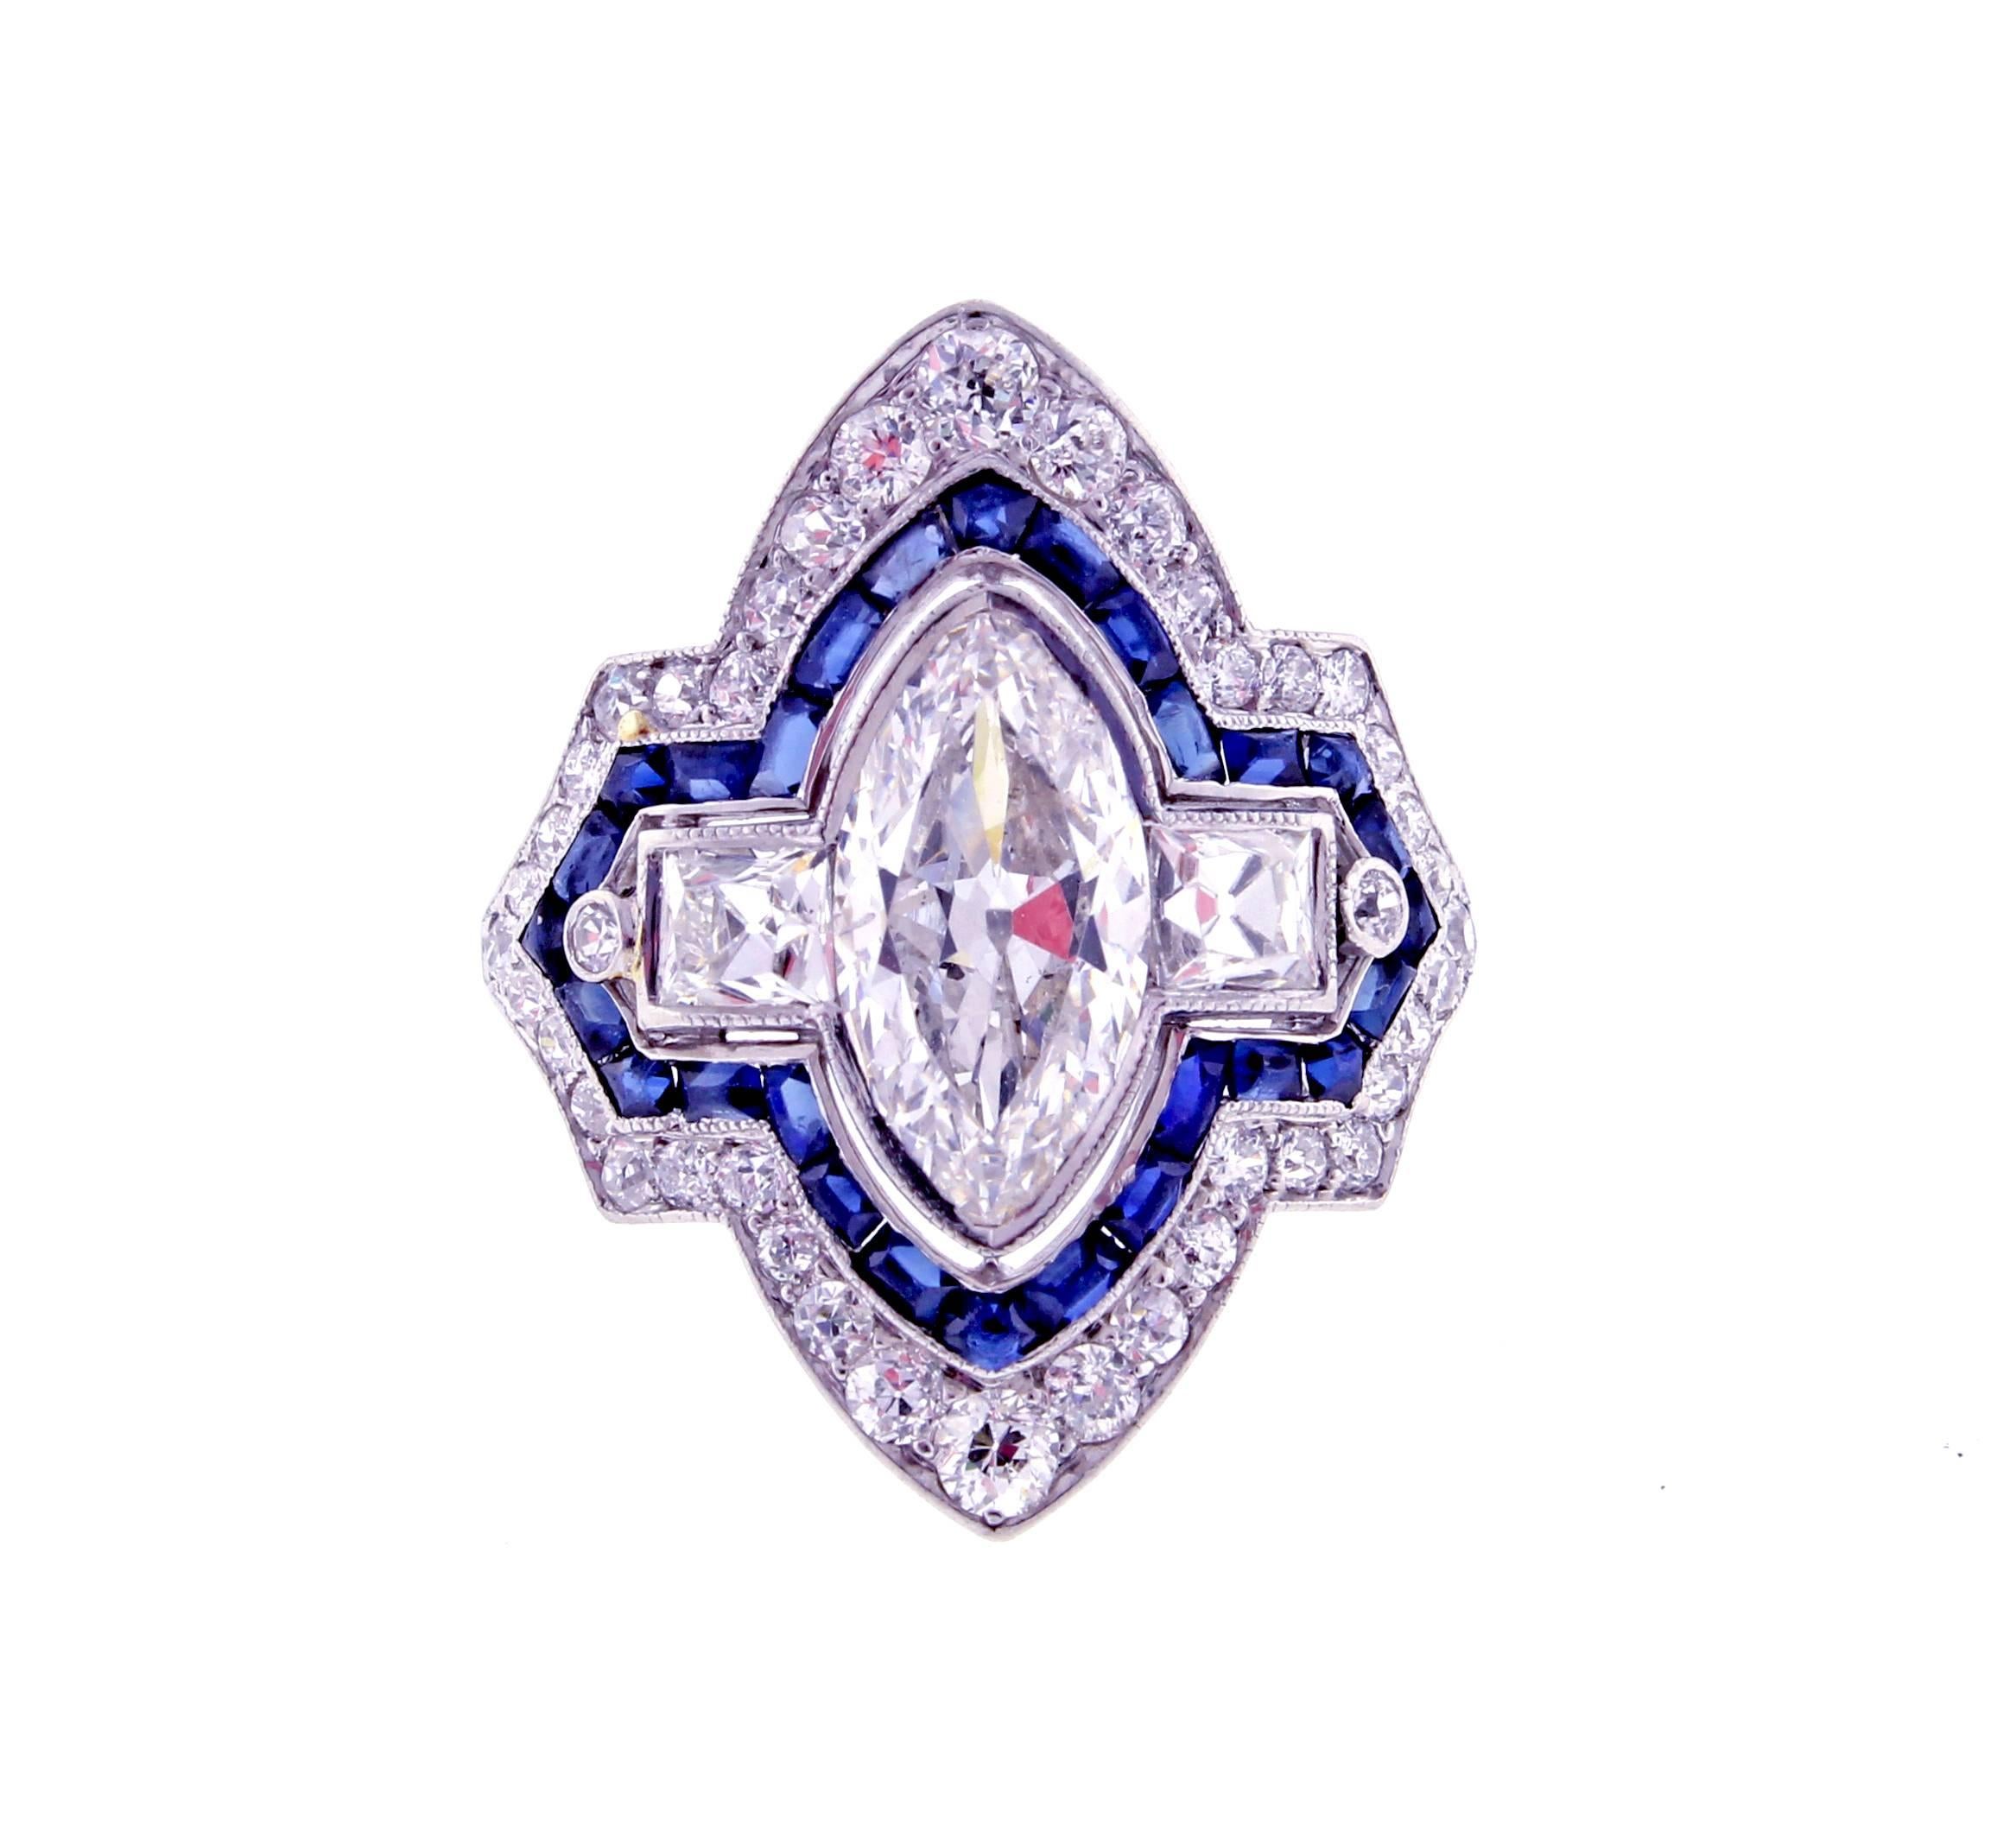 An exceptional example of Art Deco design and hand craftsmanship. The platinum ring is comprised of a center marquise diamond surrounded by sapphires. The center marquise diamond weighs approximately 1.50 carats. The diamond is E color and SI